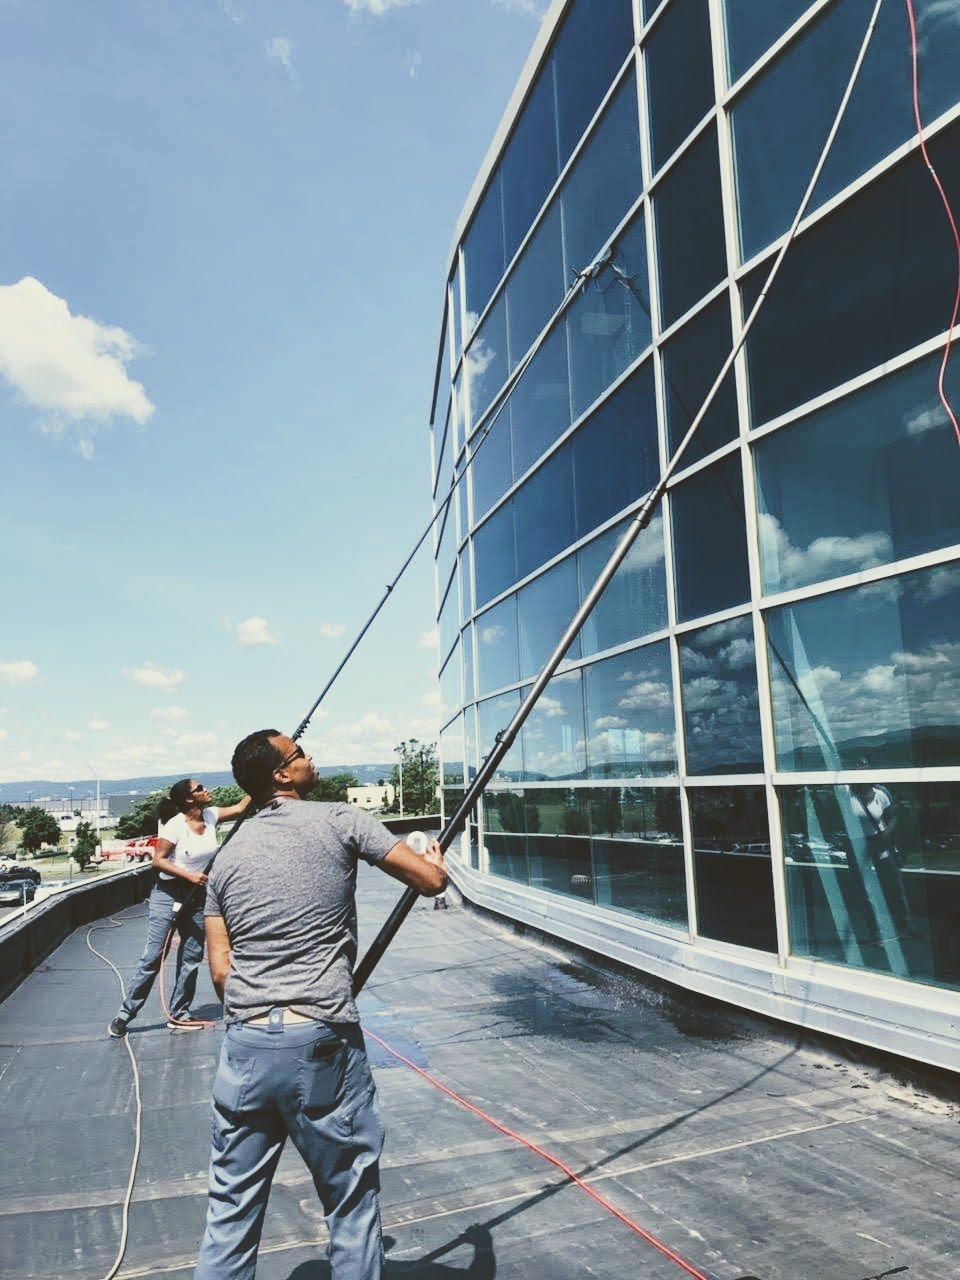 Alexander's Cleaning Service - Best Window Cleaning Service Victoria Ln, Abington Pennsylvania 18411